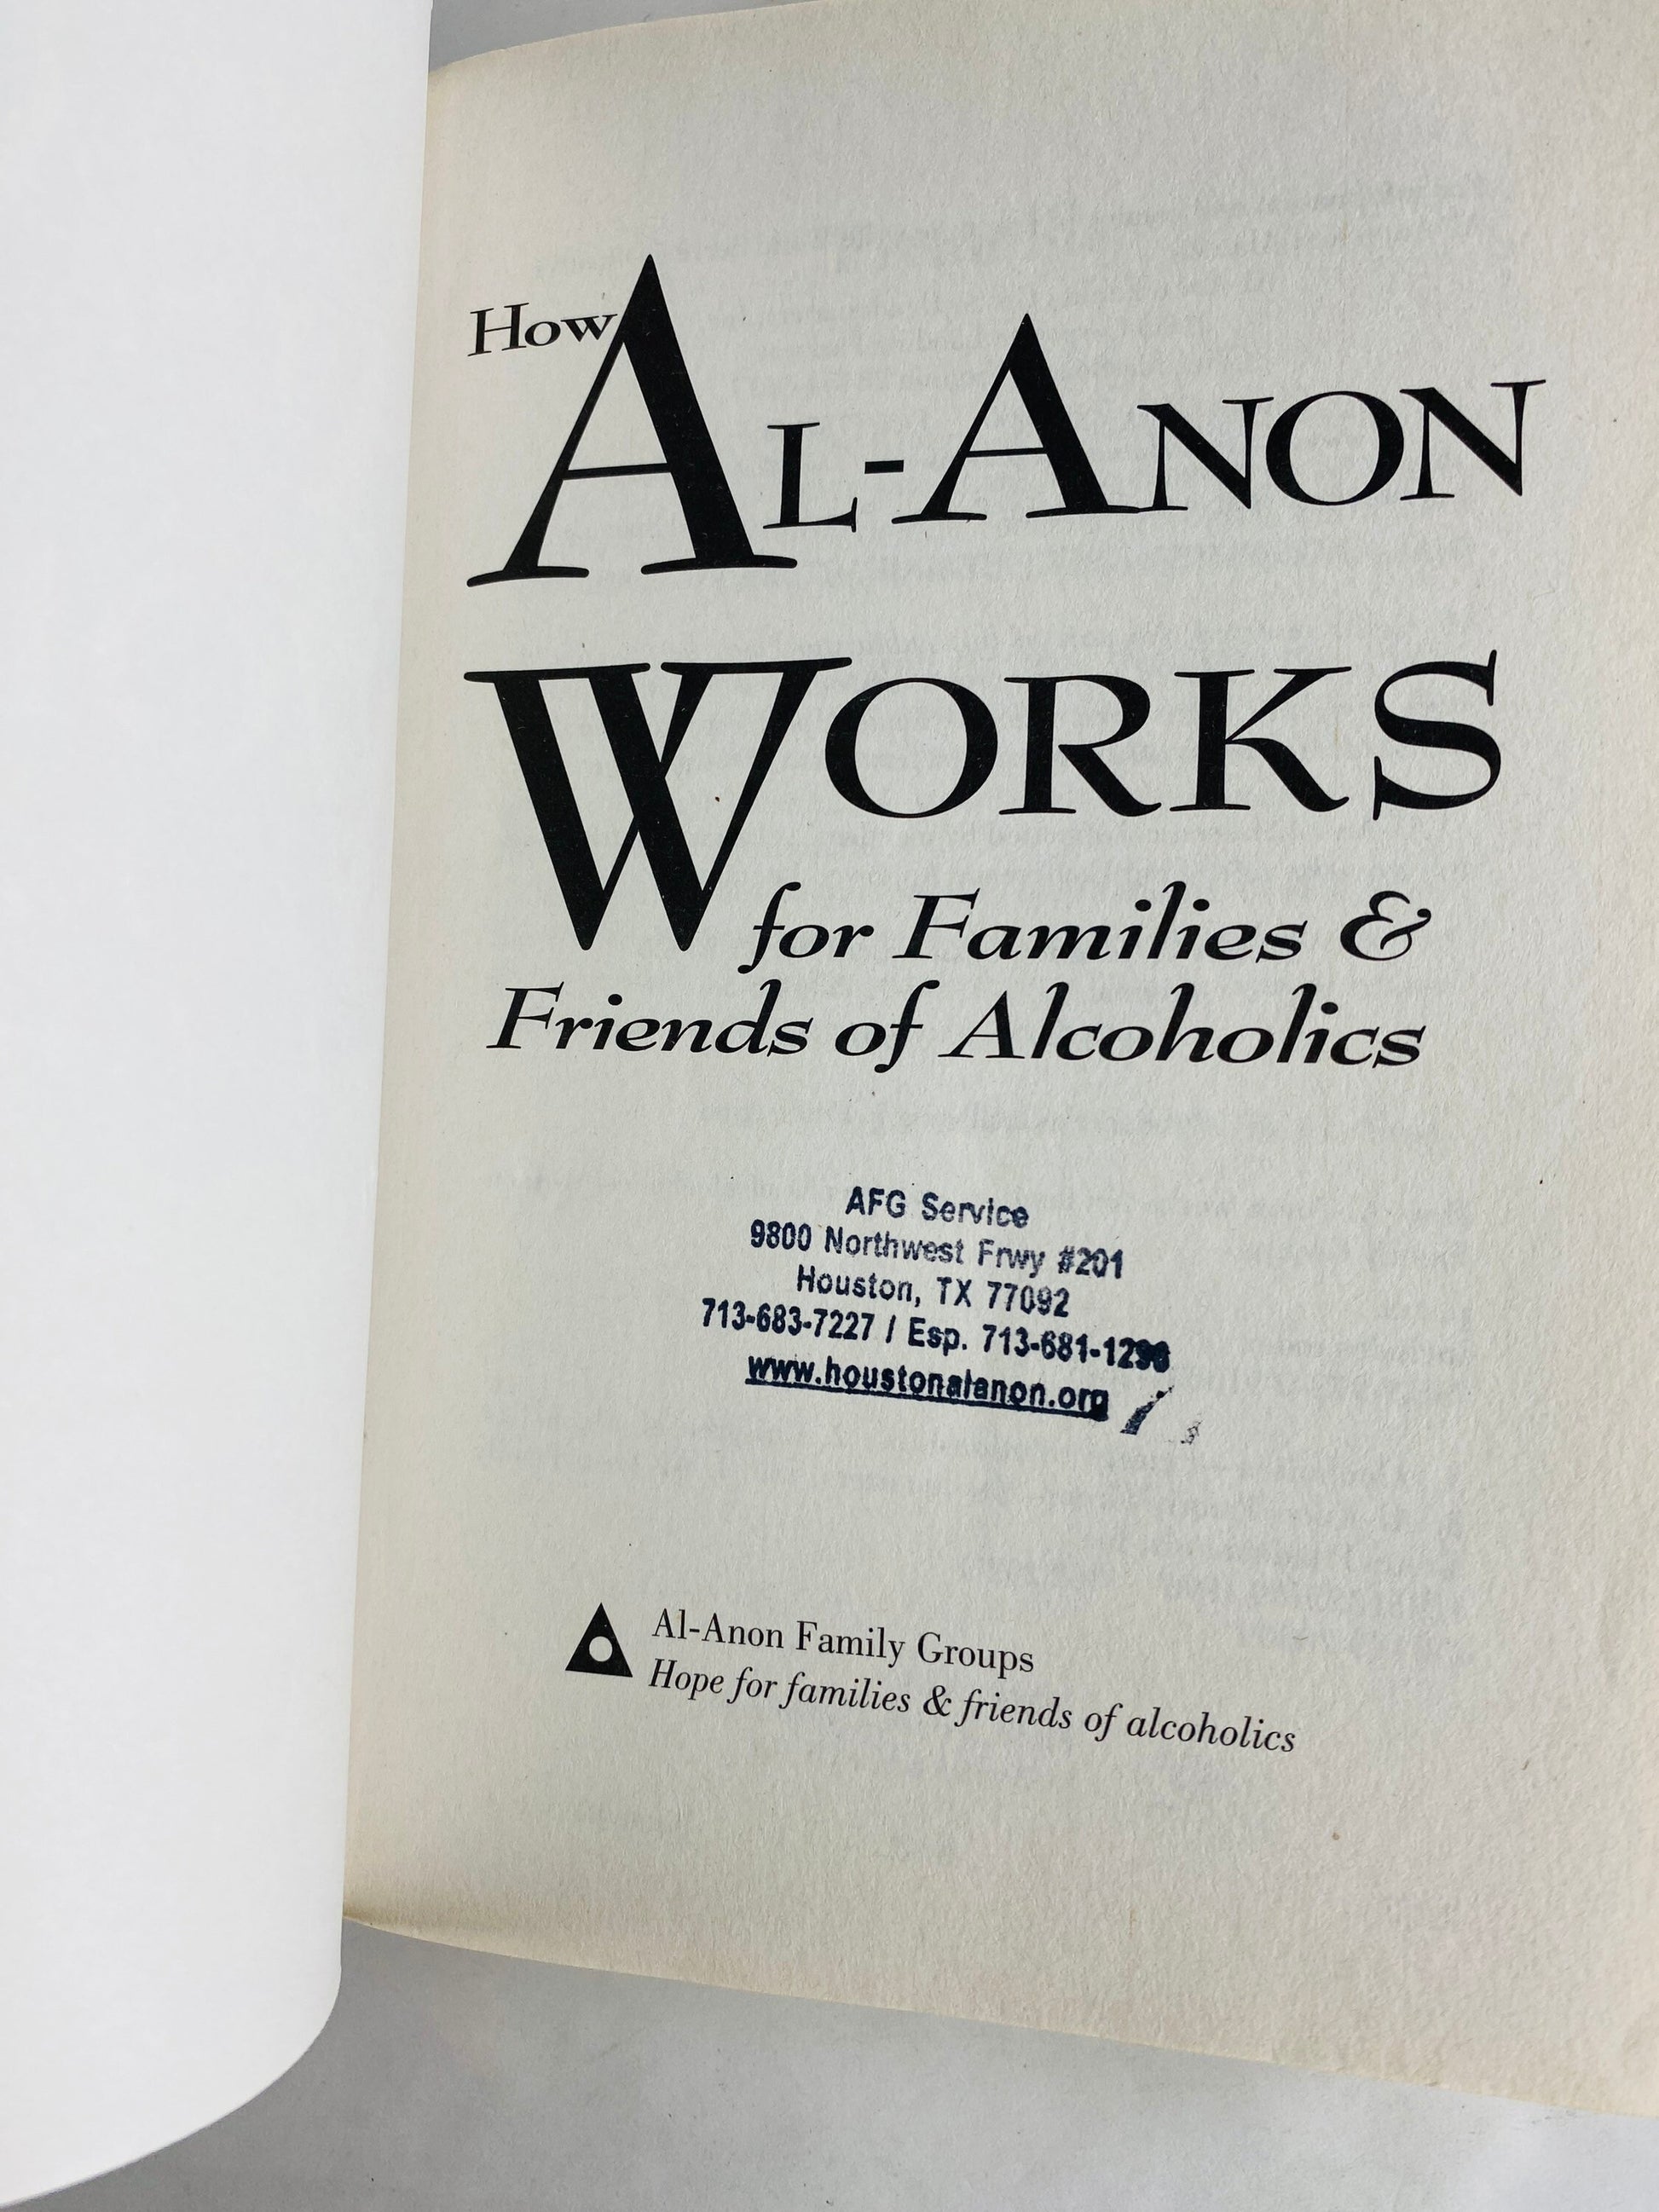 1995 Al-anon Works vintage paperback book Twelve Steps & Twelve Traditions Alcoholics Anonymous Recovery AA sobriety 12 program